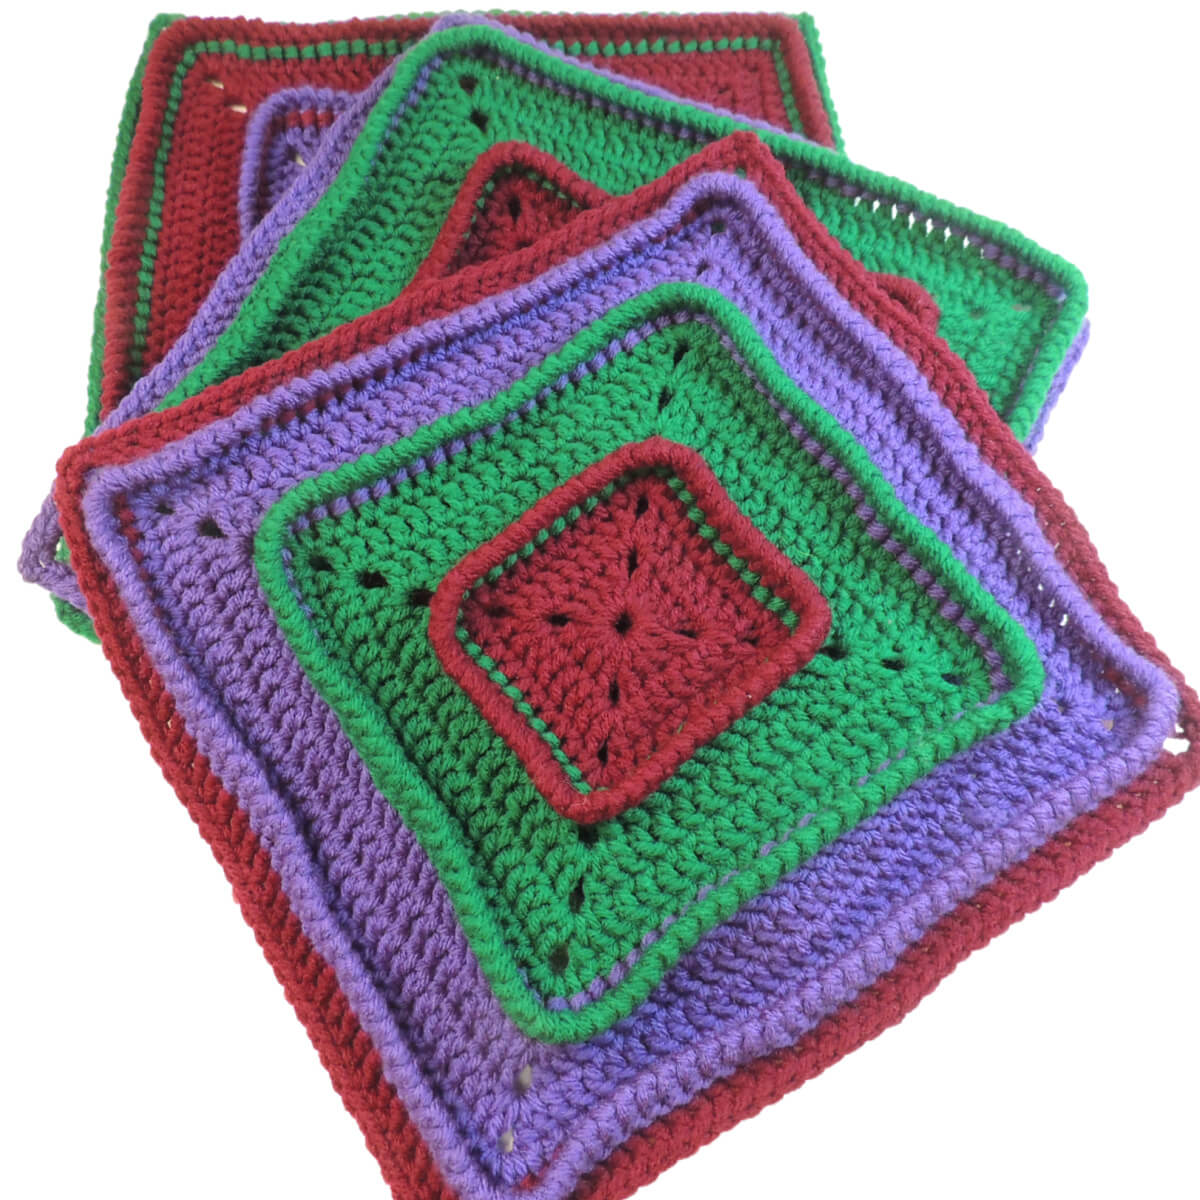 Three crochet squares stacked and slightly spread at a diagonal. Top square starts with burgundy on the inside, then has a section of green, then purple, then burgundy, each attached below the last round of the section before, making the last round stand up. Other 2 squares are the same with the colors in a different order.